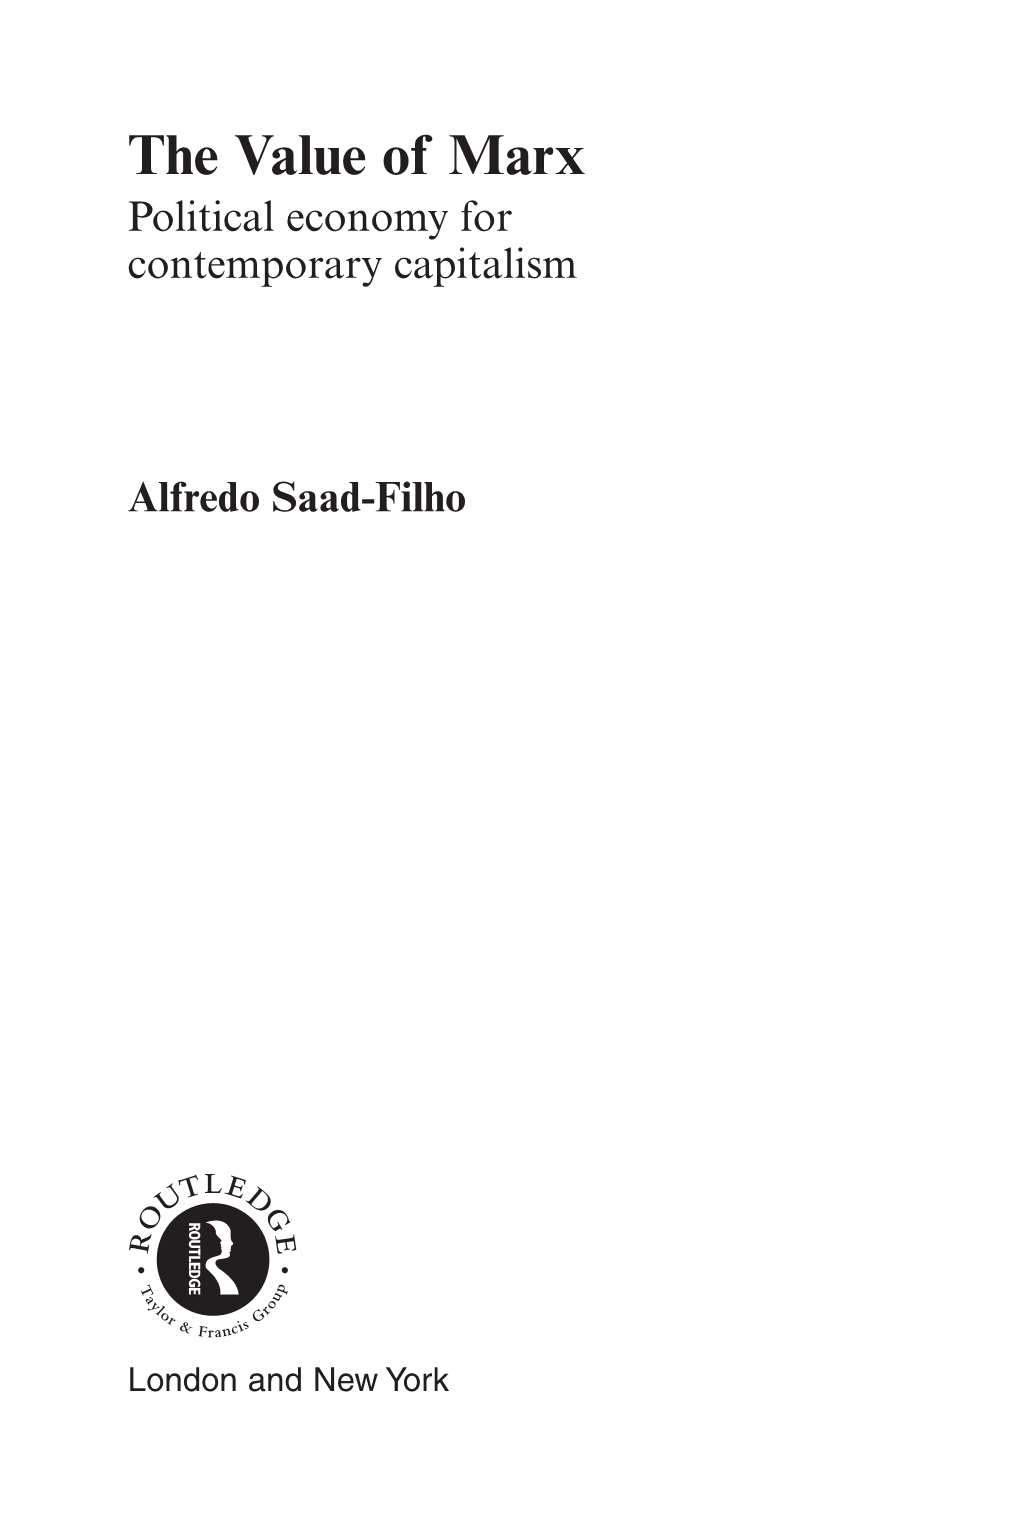 The Value of Marx: Political Economy for Contemporary Capitalism